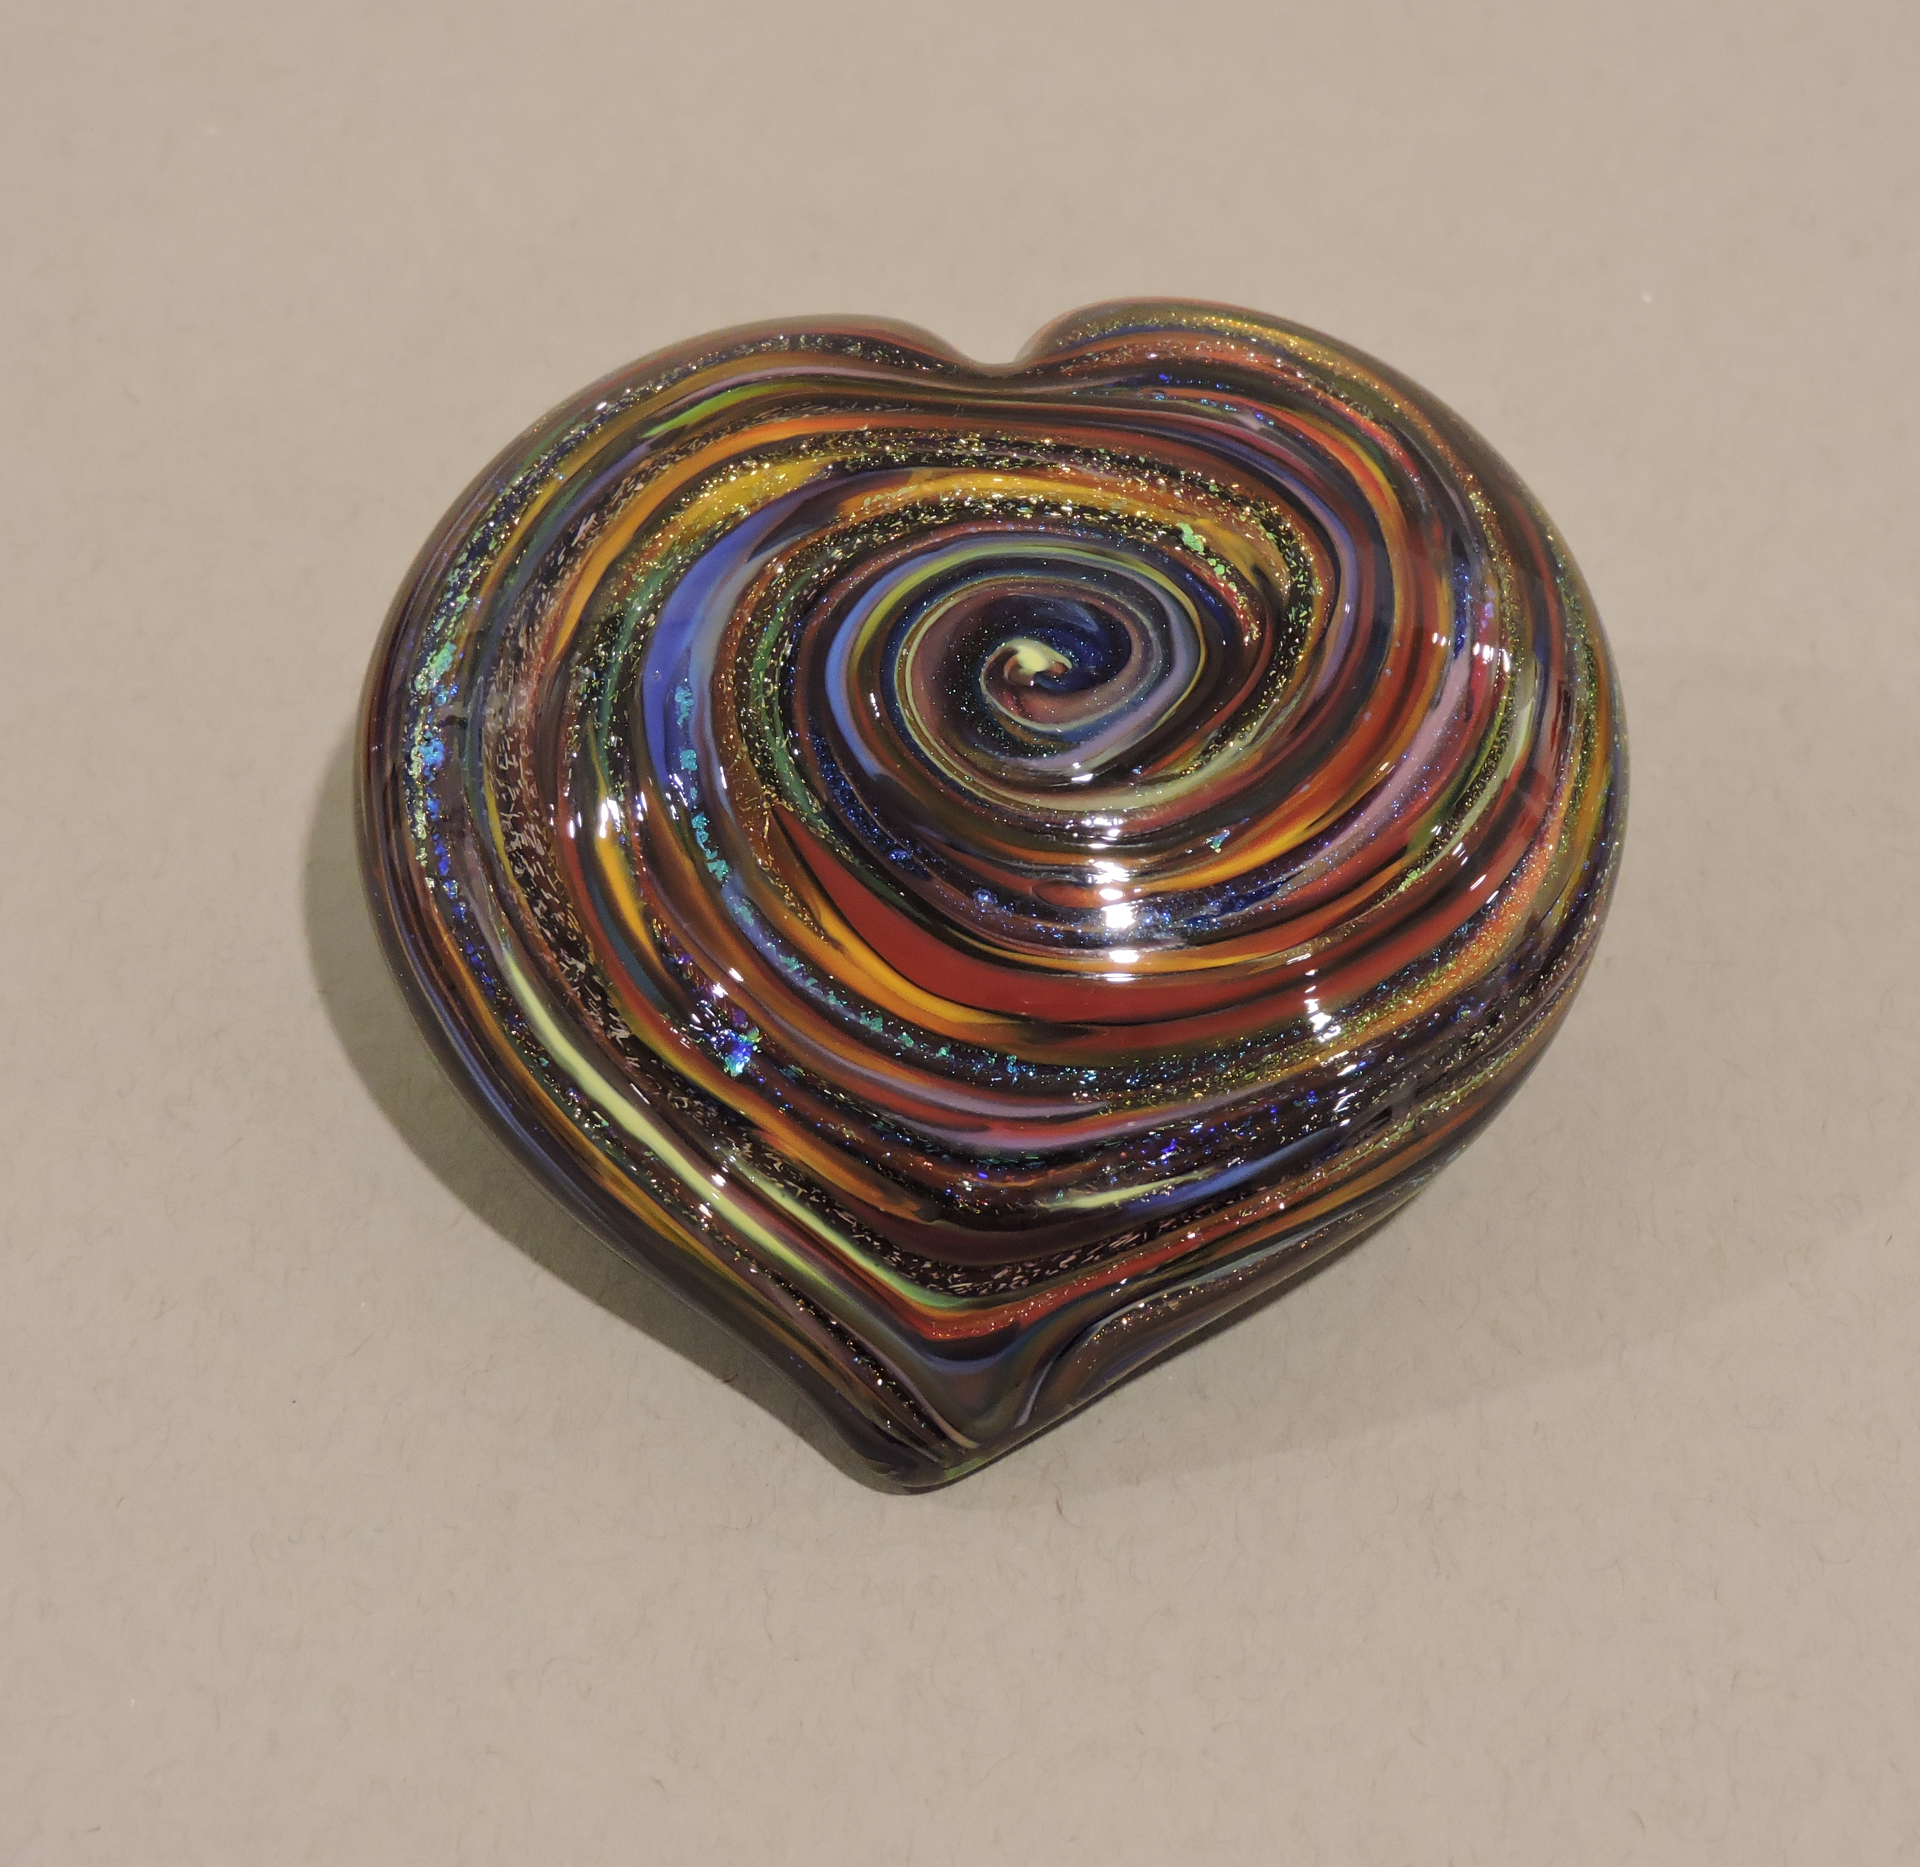 Heart paperweight by Mad Art Studios